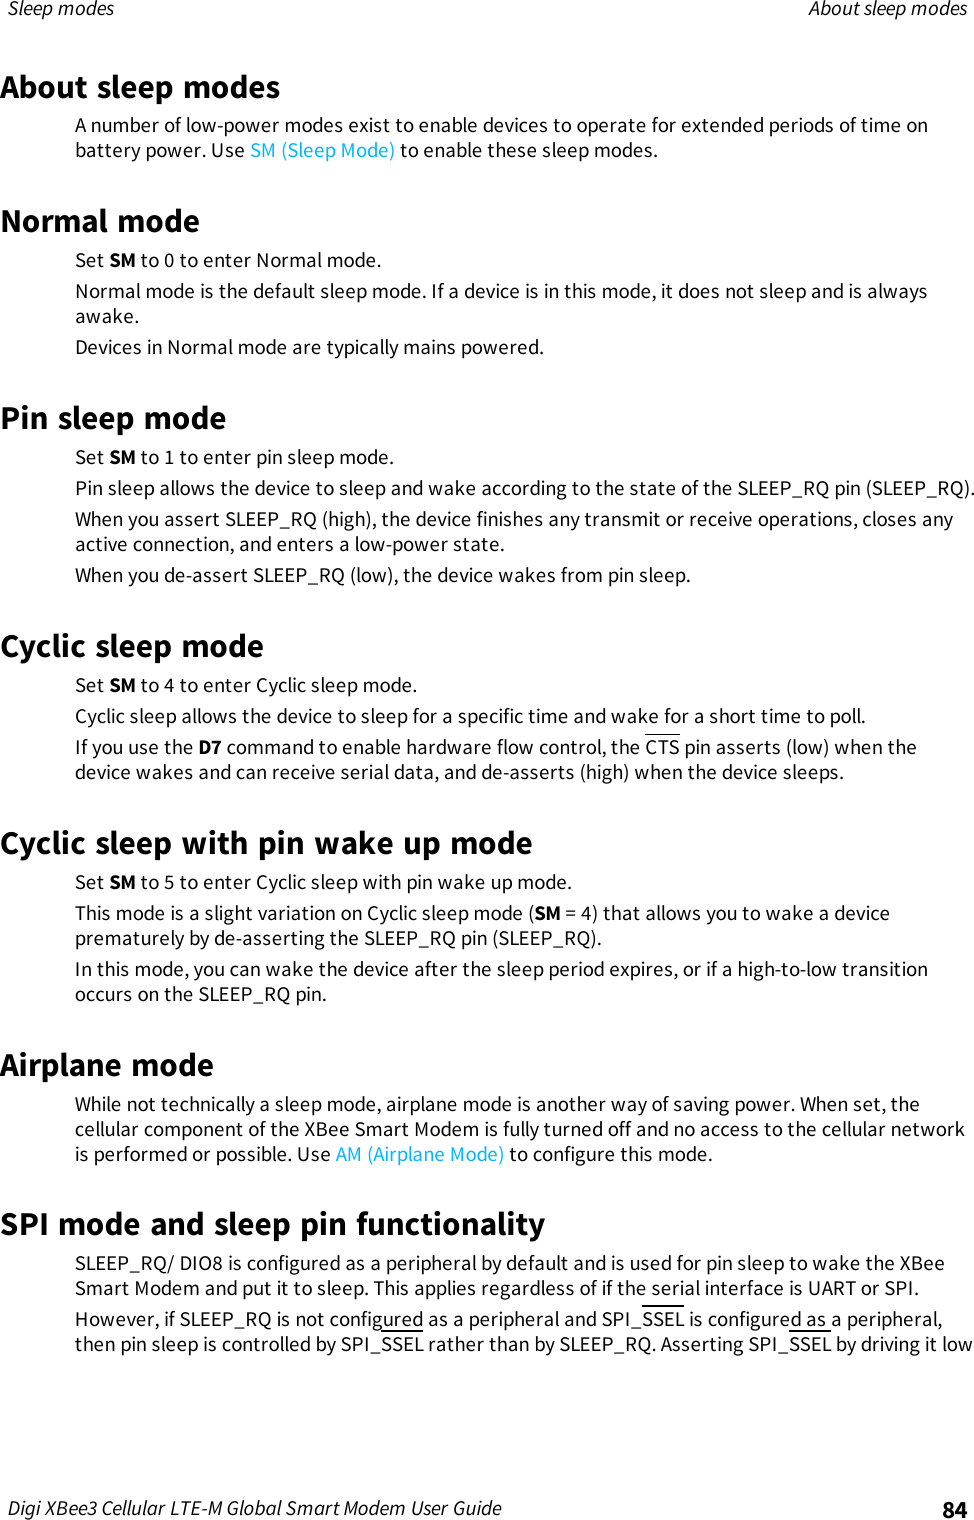 Page 84 of Digi XB3M1 XBee3 Cellular LTE-M User Manual 